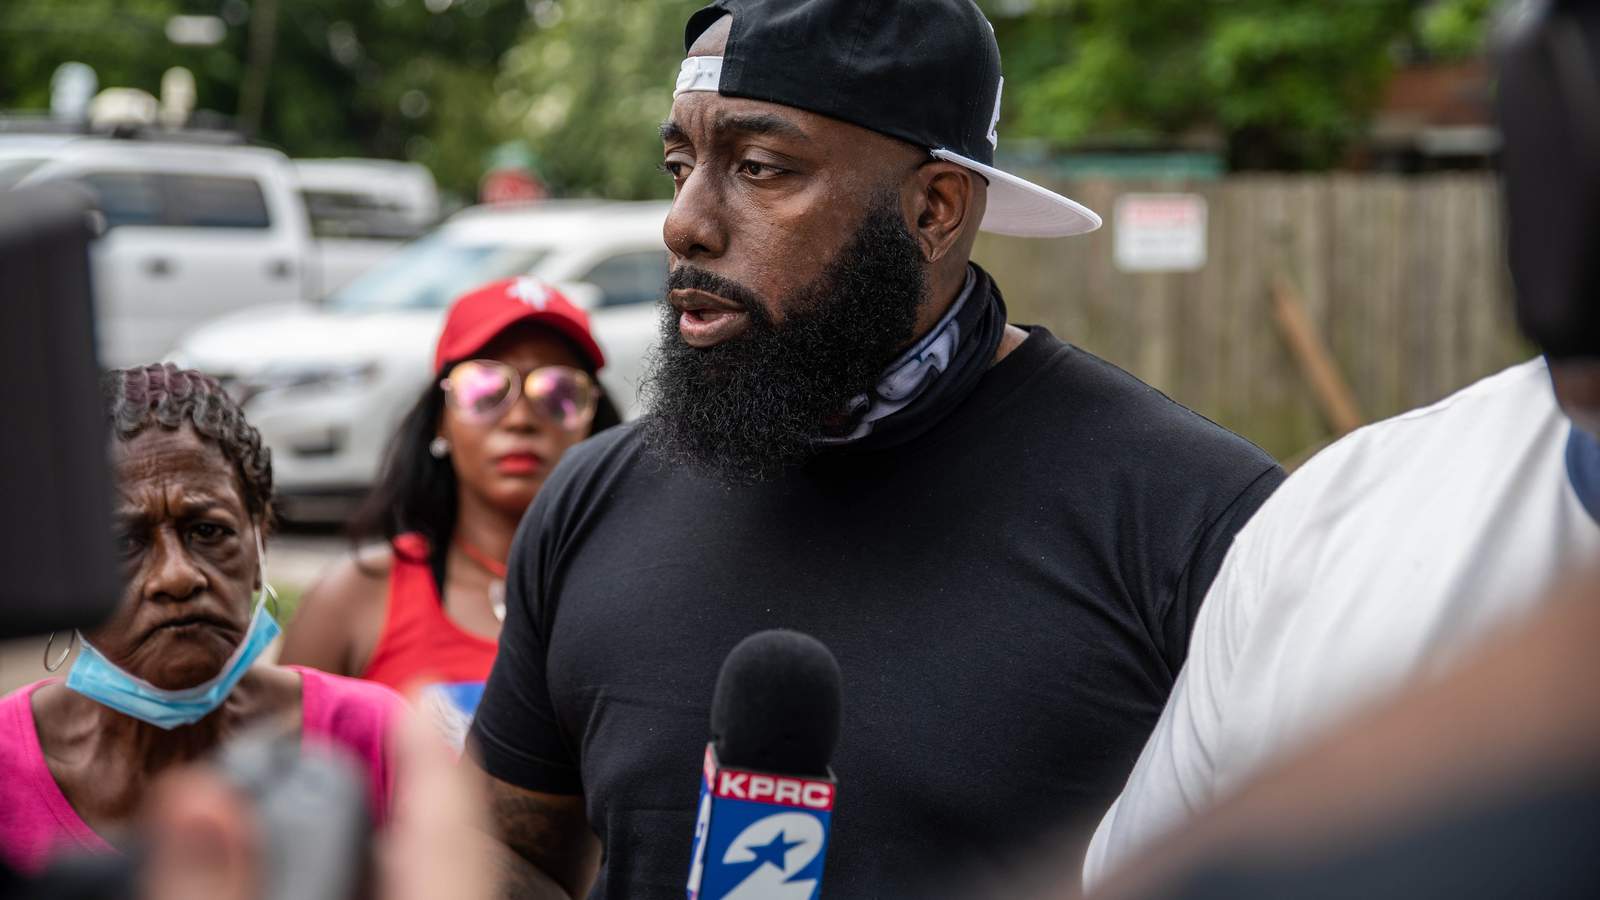 Trae tha Truth, Texans wide receiver Kenny Stills among dozens arrested at Breonna Taylor protest